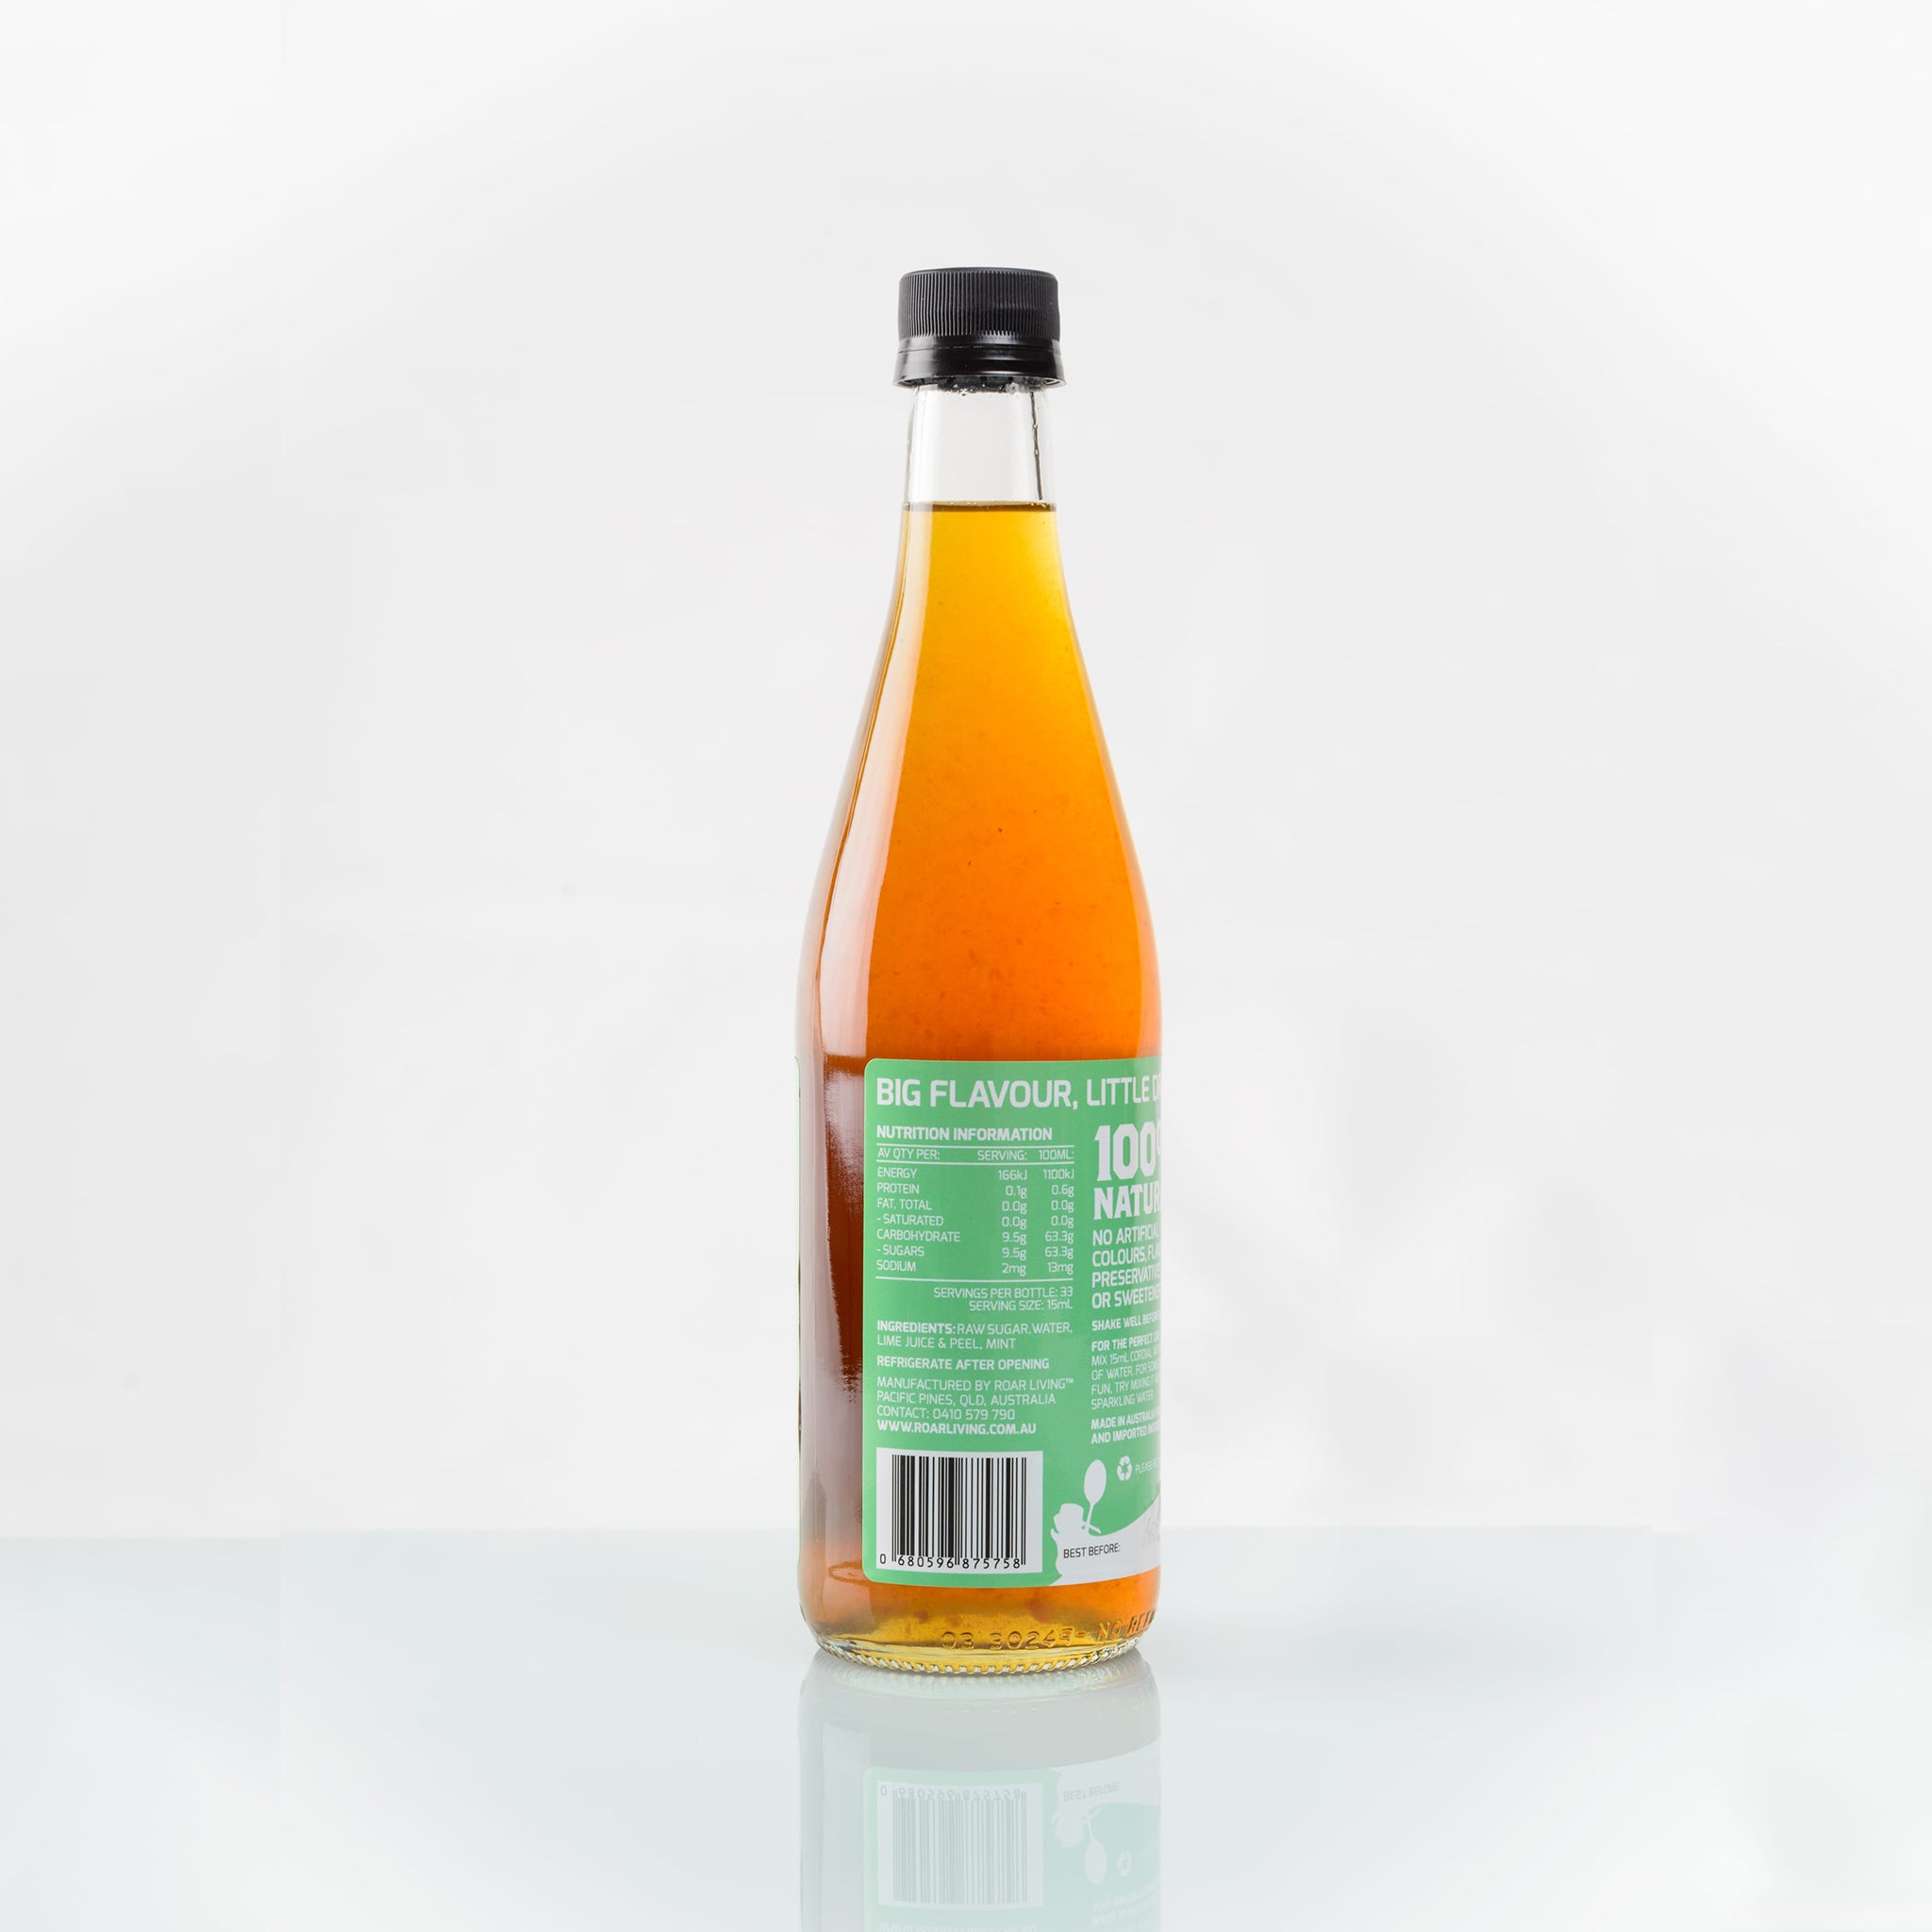 Roar living Cool Mint cordial back label. Ingredients raw sugar, water, lime juice, mint leaves. Up to 33 serves per bottle. Shake bottle before each use and place in fridge once opened 